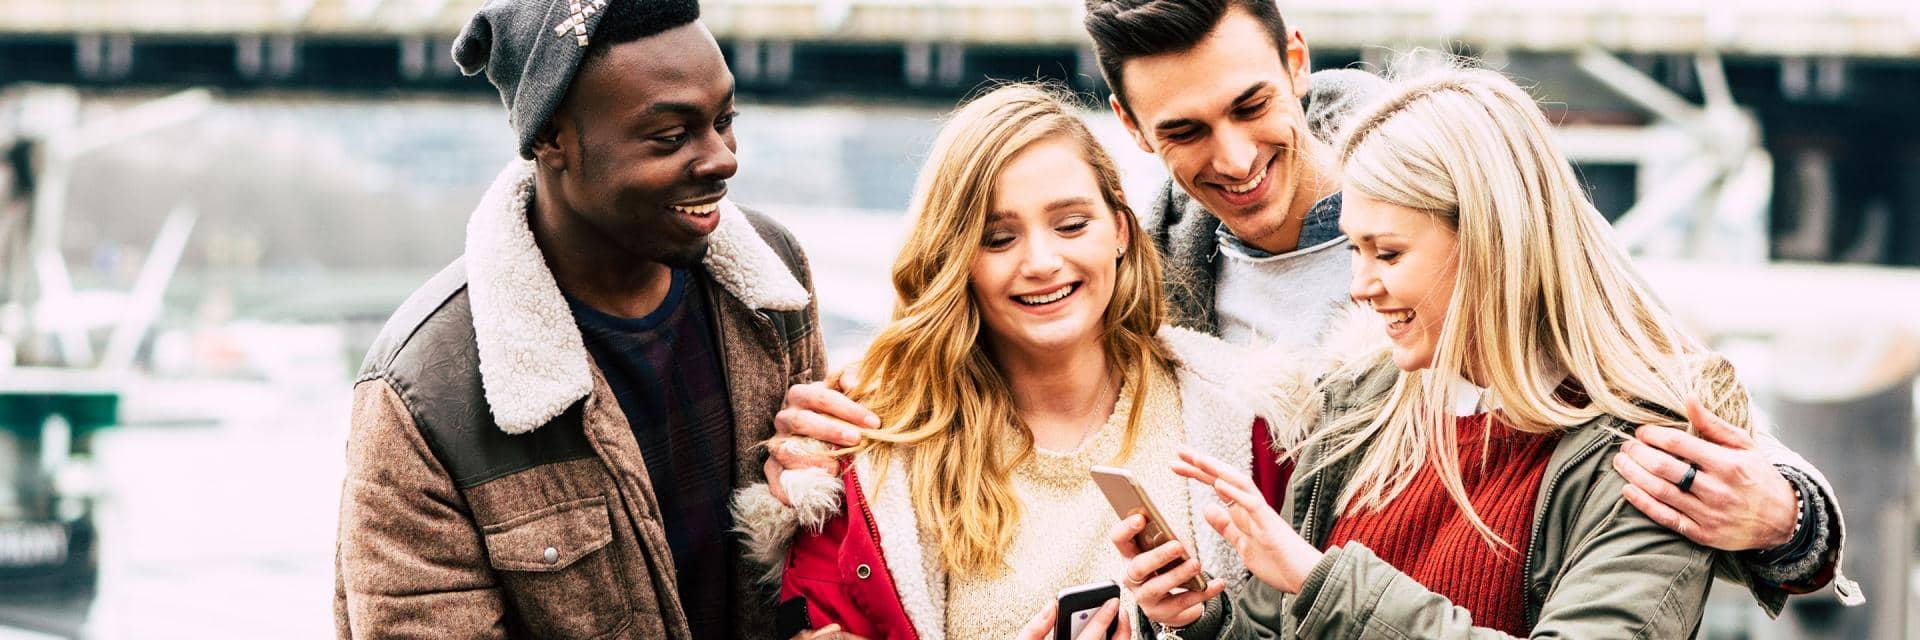 A group of young people wearing winter clothes laugh as they look at something on a mobile phone